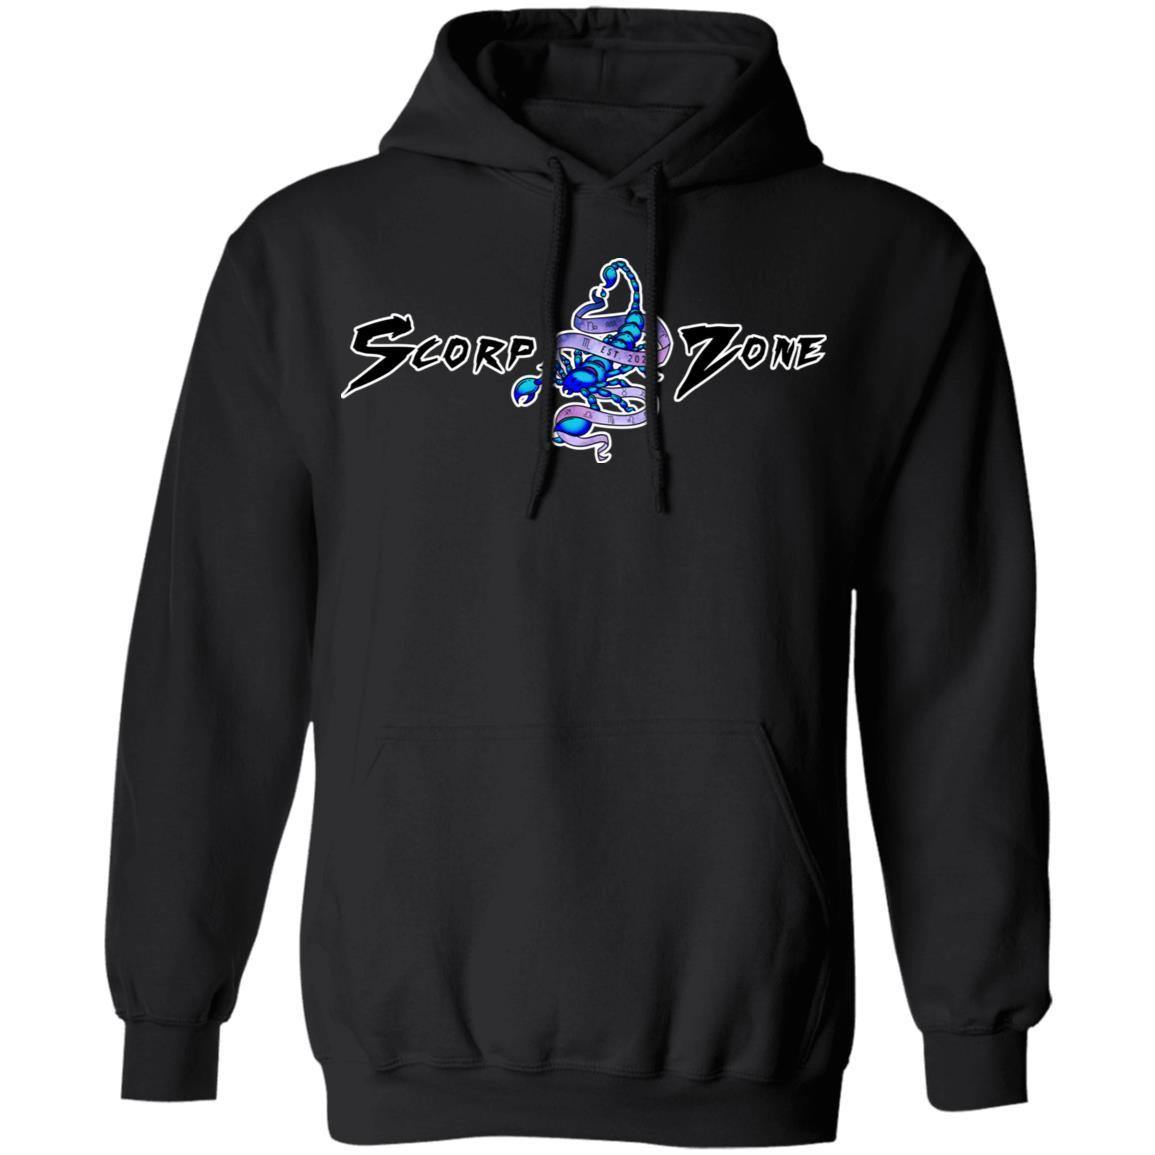 PISCES DESIGN ON BACK AND SMALL SCORP ZONE LOGO ON FRONT - Z66 Pullover Hoodie - ScorpZone